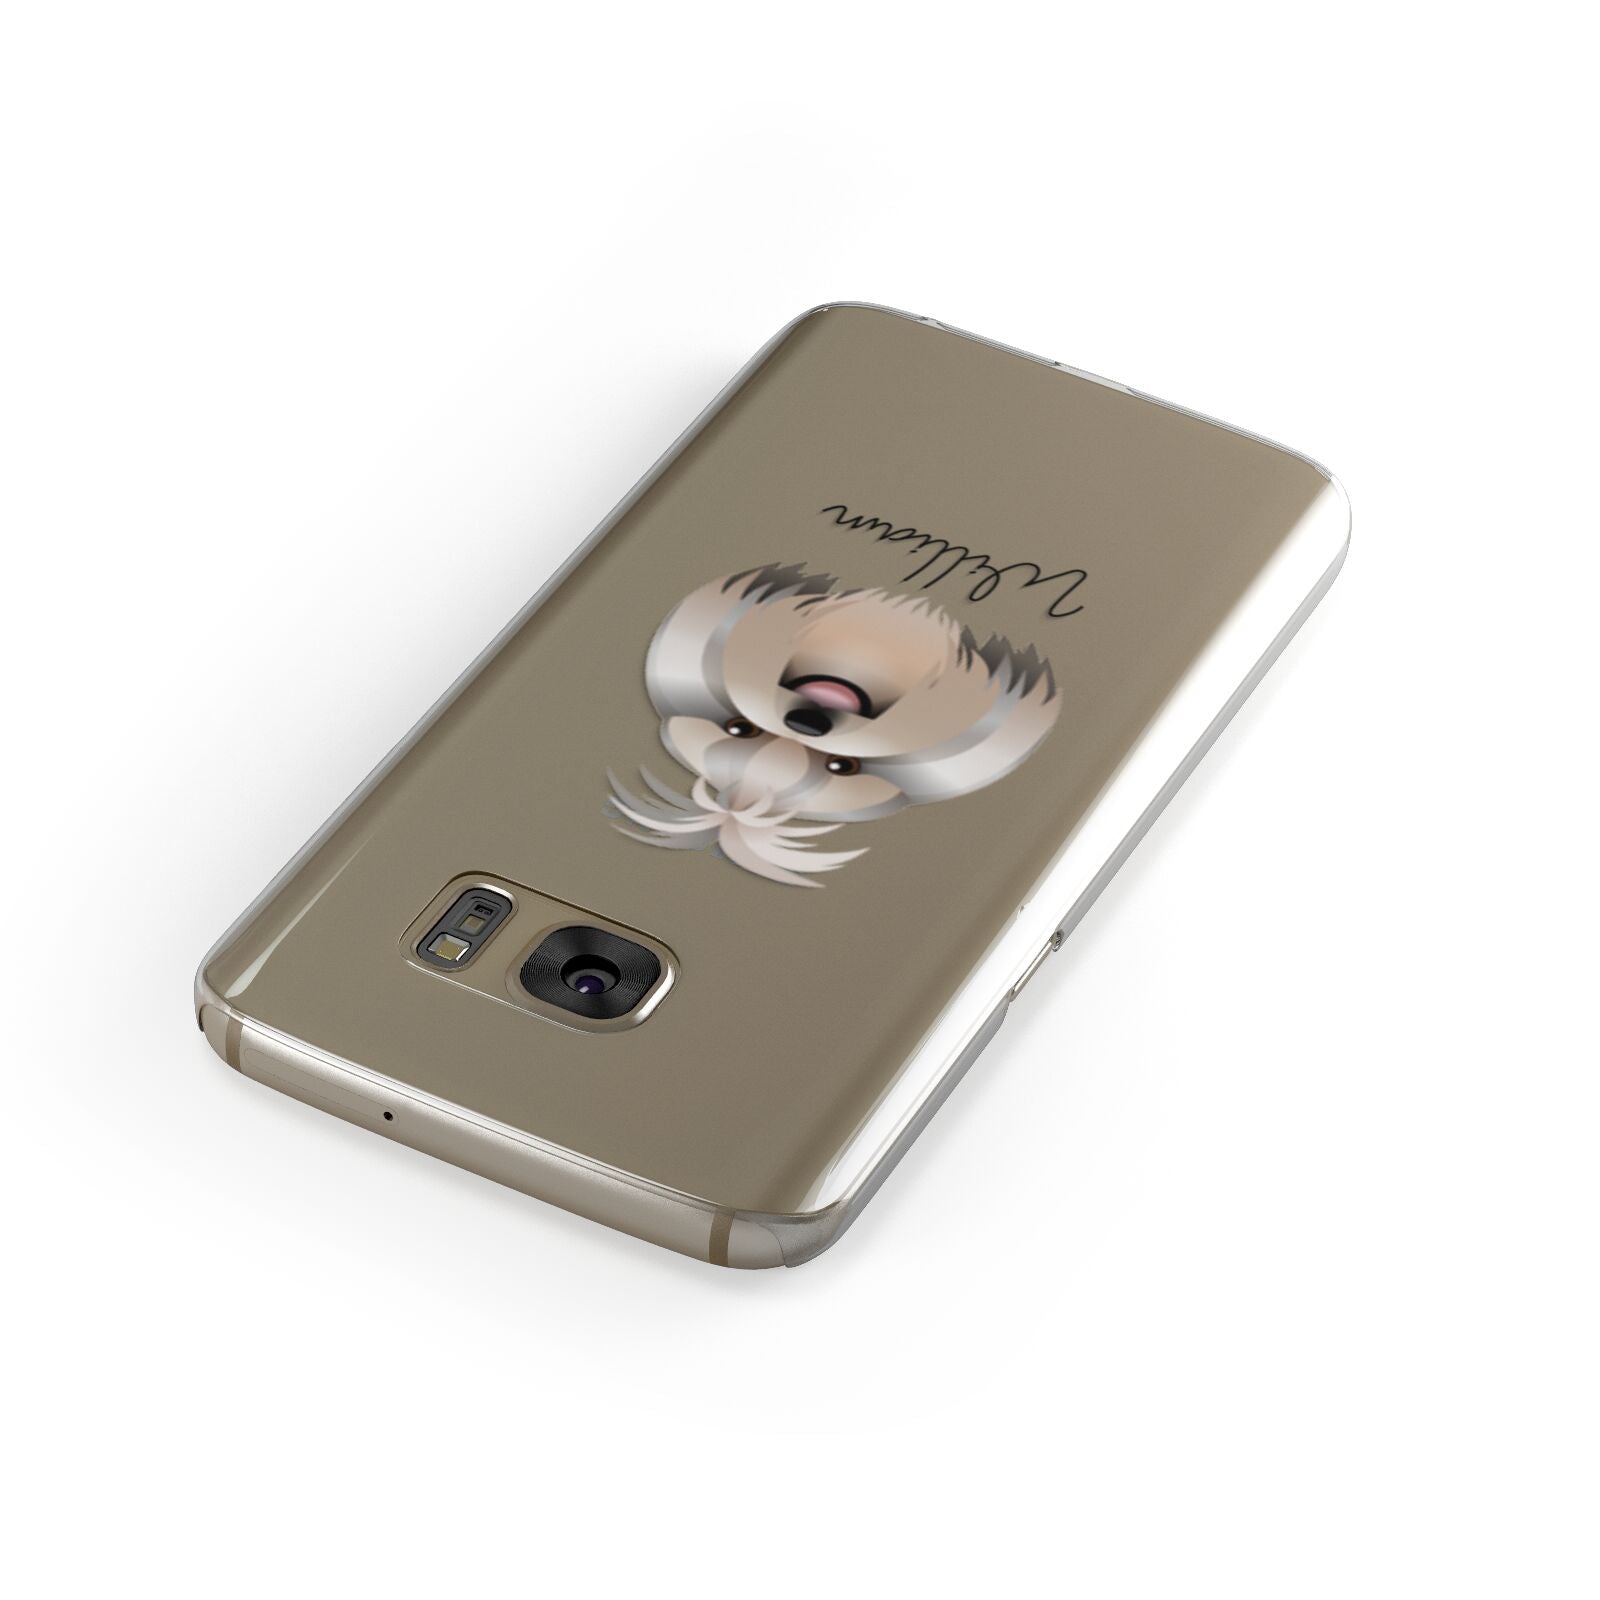 Shih Tzu Personalised Samsung Galaxy Case Front Close Up